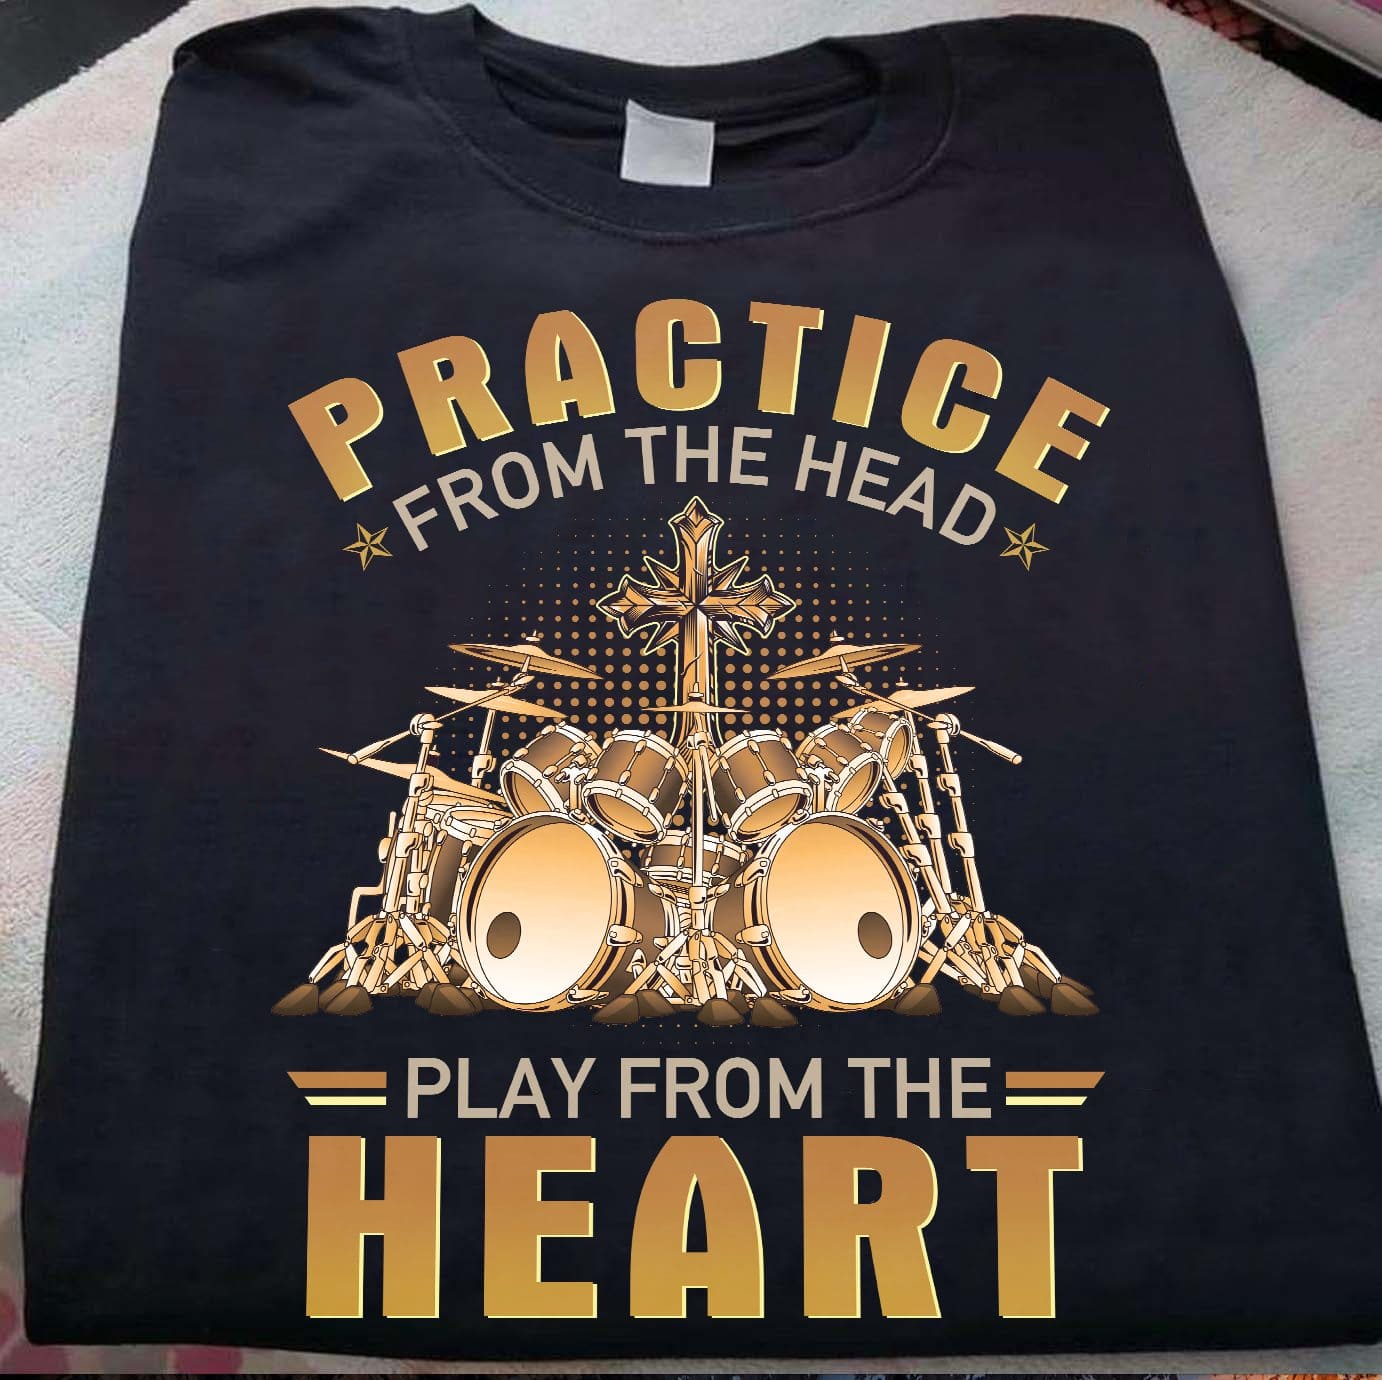 Practice from the head, play from the heart - Passionate drummer T-shirt